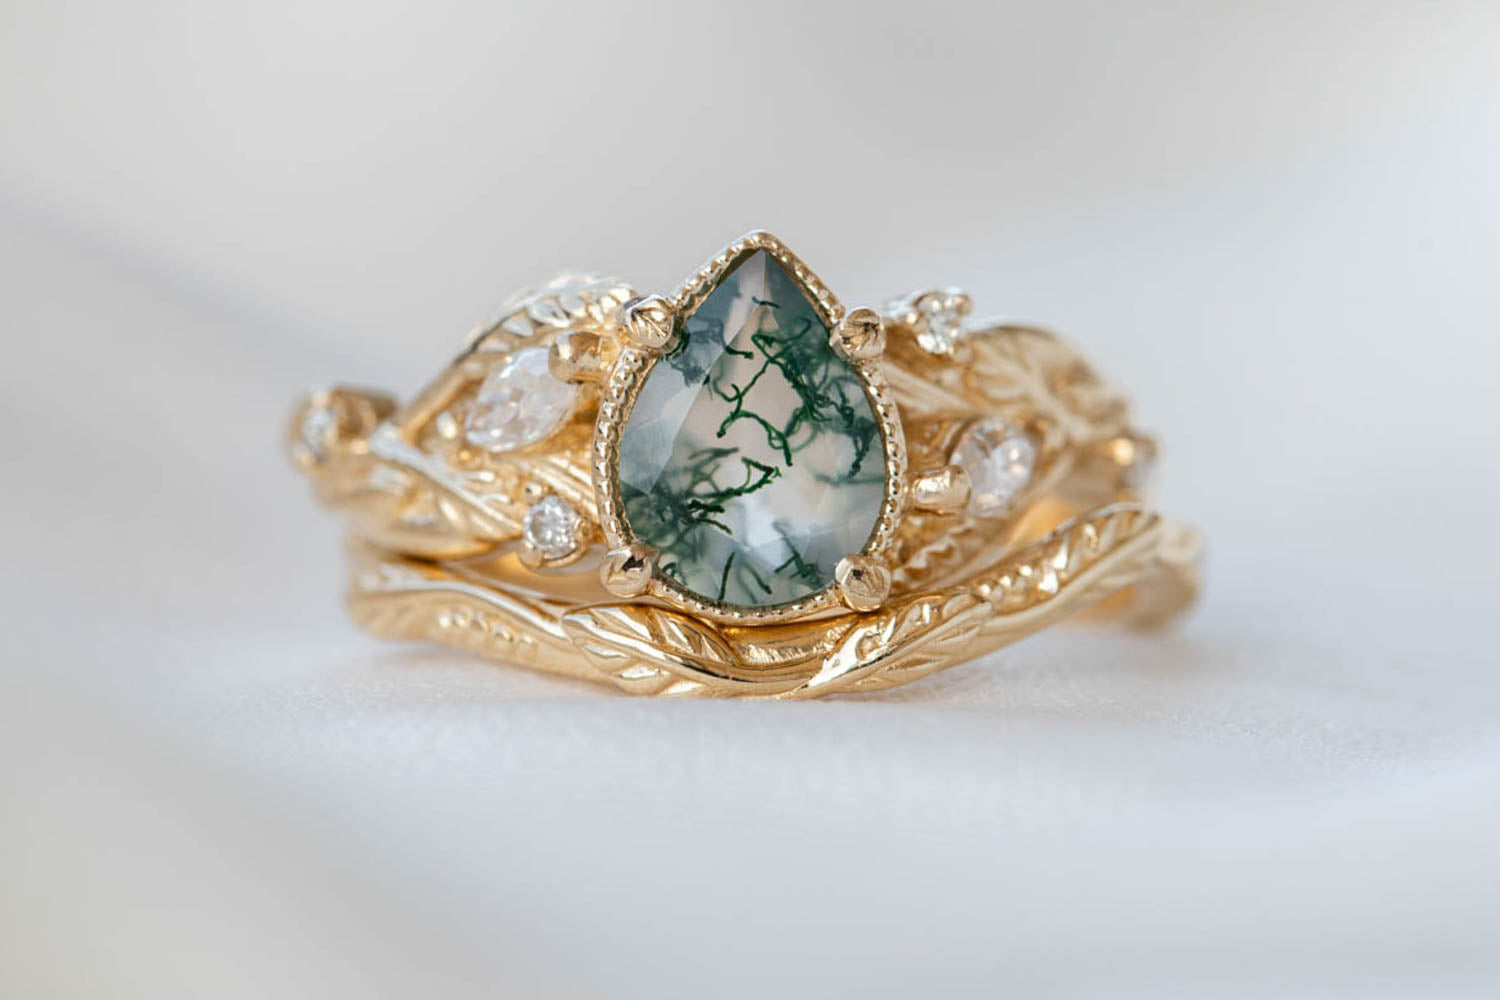 Moss Agate Engagement Rings: A Complete Guide